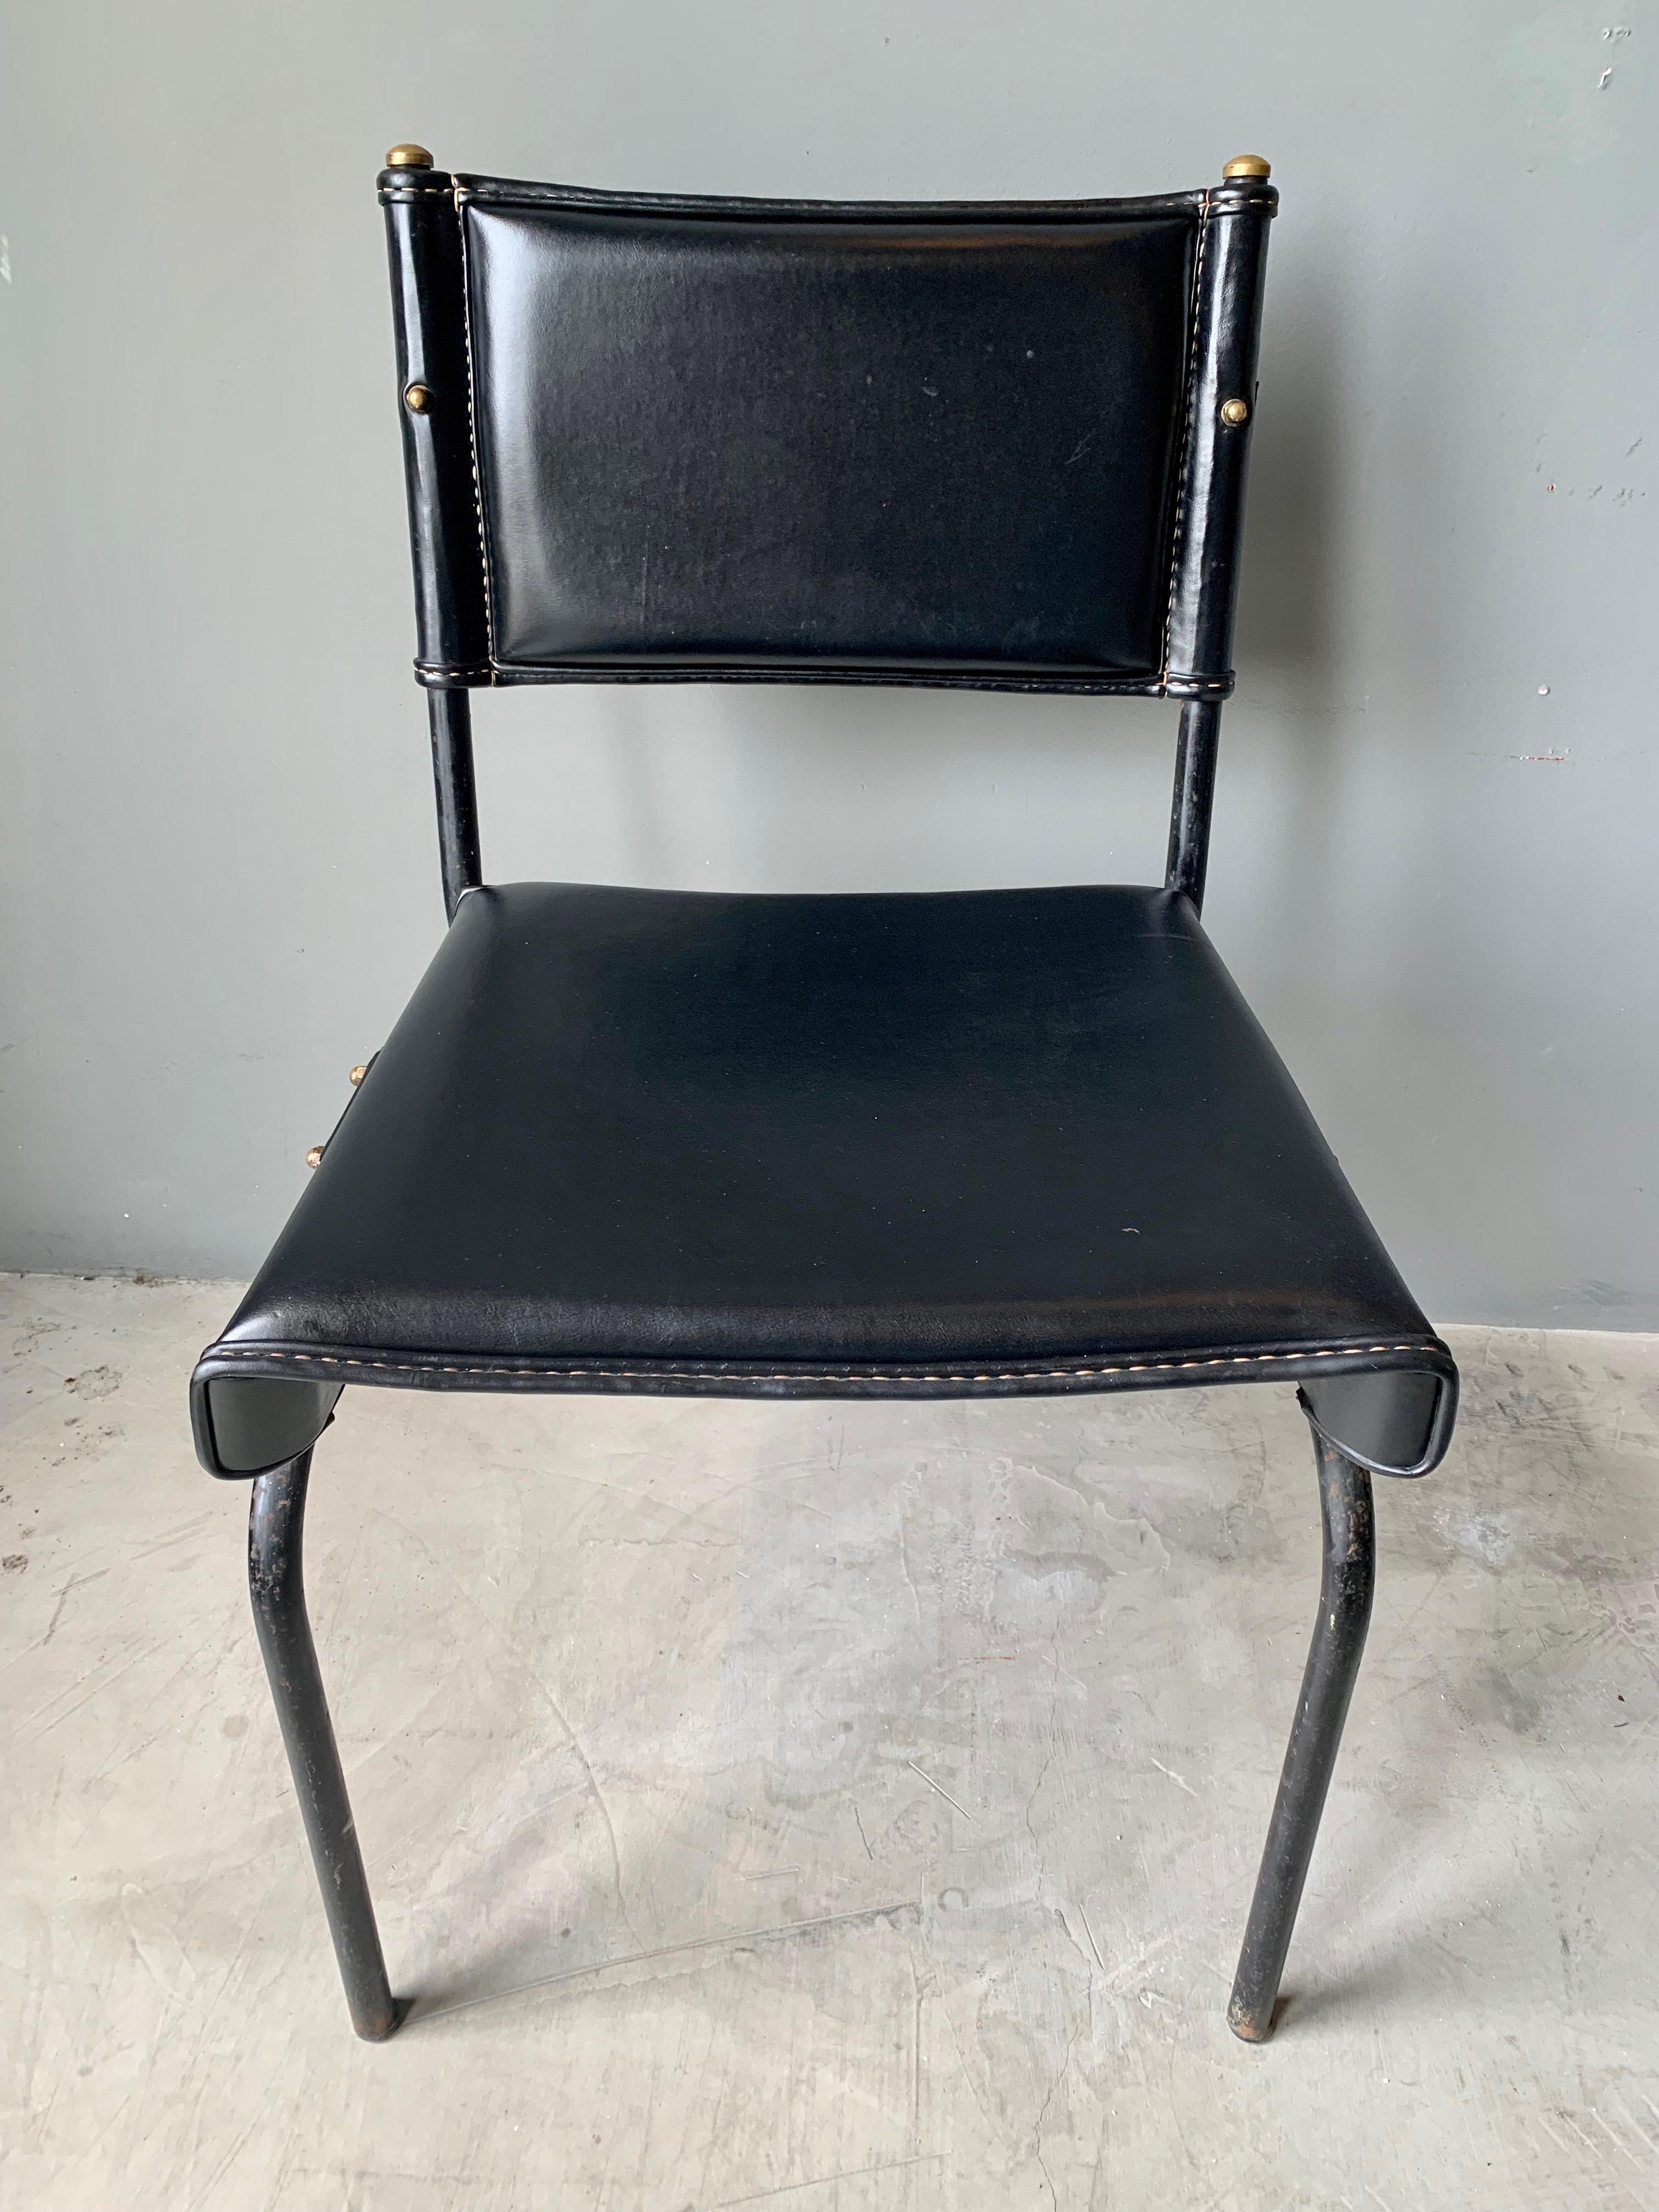 Stunning chair and footstool by French designer Jacques Adnet. Iron frame with black leather throughout. Original leather in very good condition. Signature Adnet contrast stitching. Gorgeous set.


Chair dimensions: 31.5